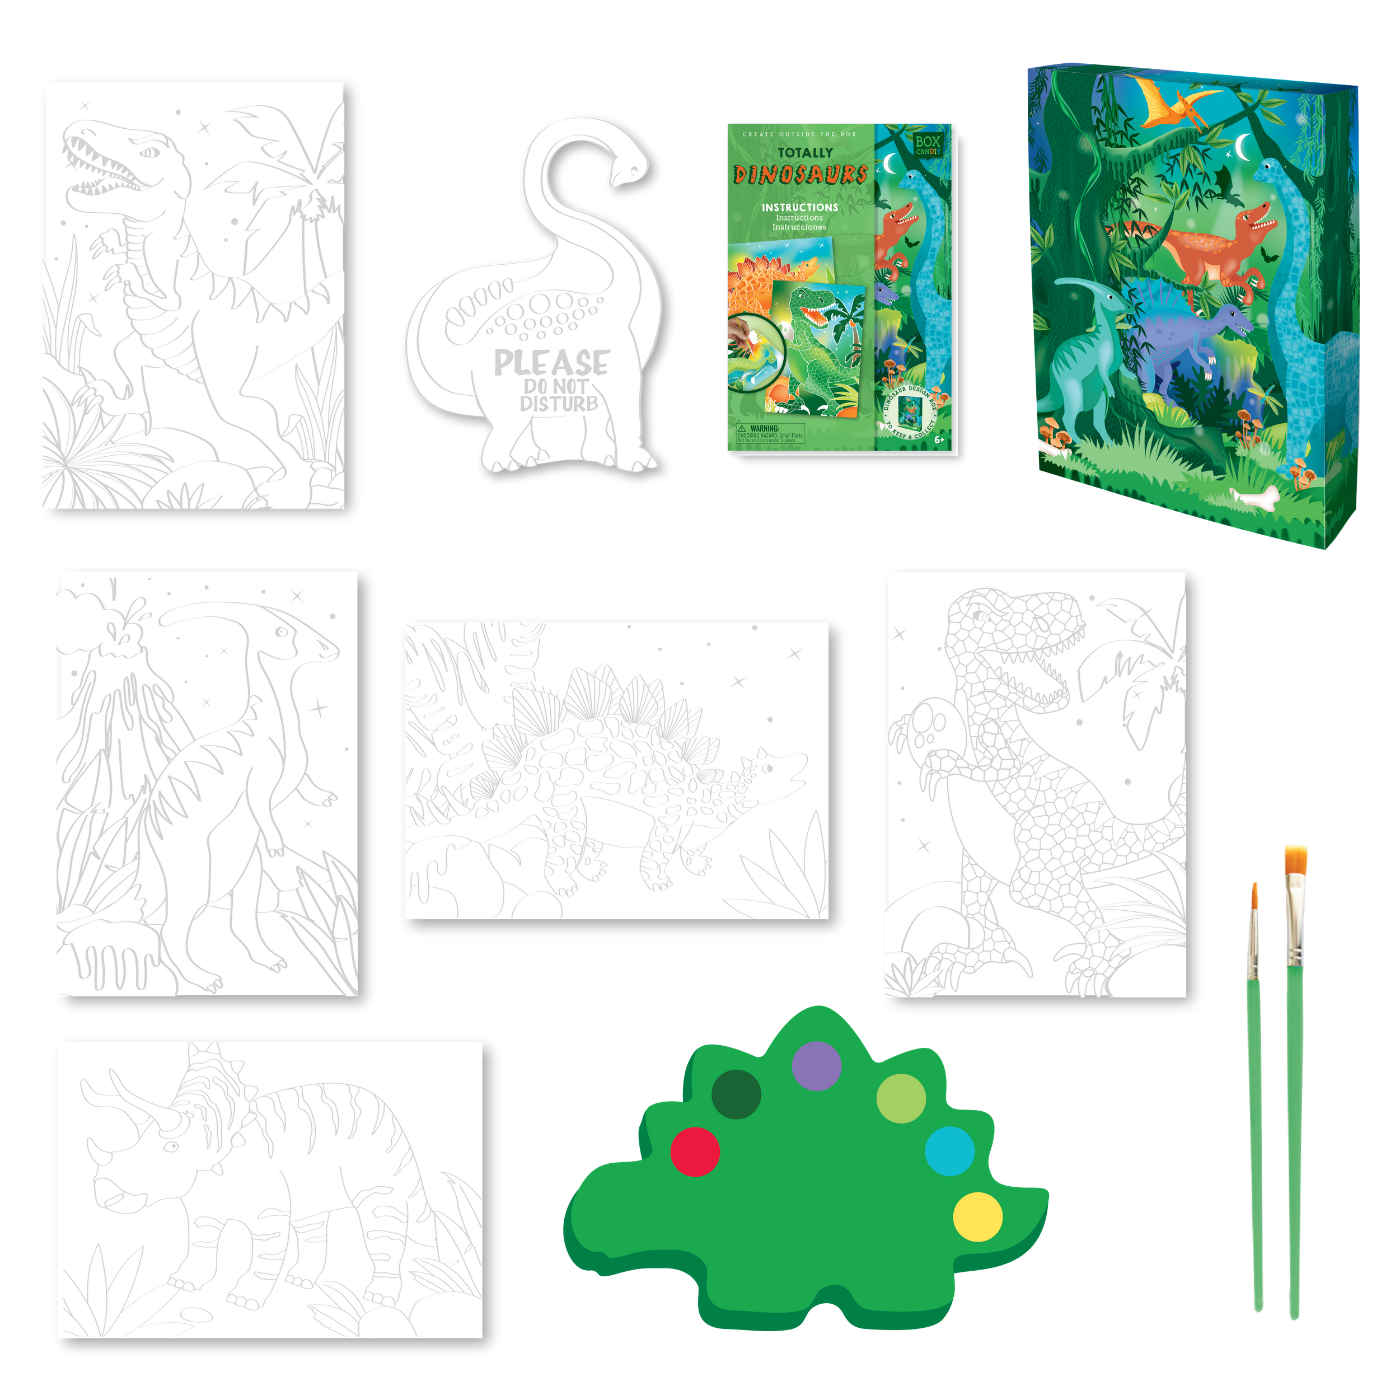 Totally Dinosaurs Watercolours Craft Set